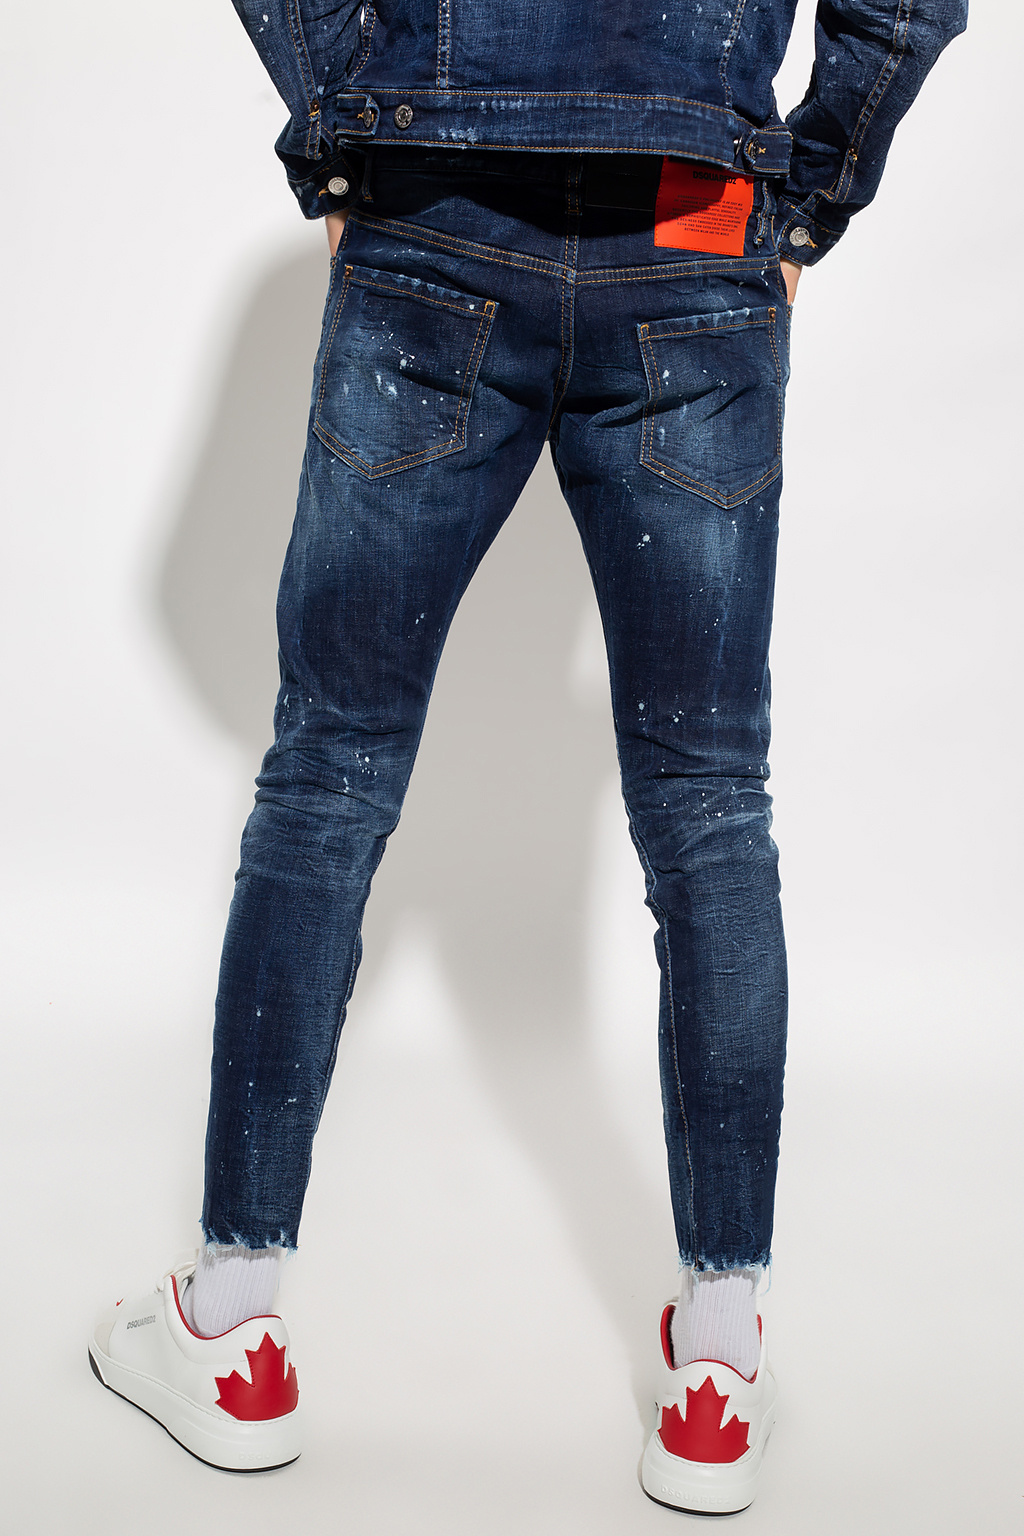 Less genetically Pacific Islands Dsquared2 'Sexy Twist' jeans | Men's Clothing | Vitkac